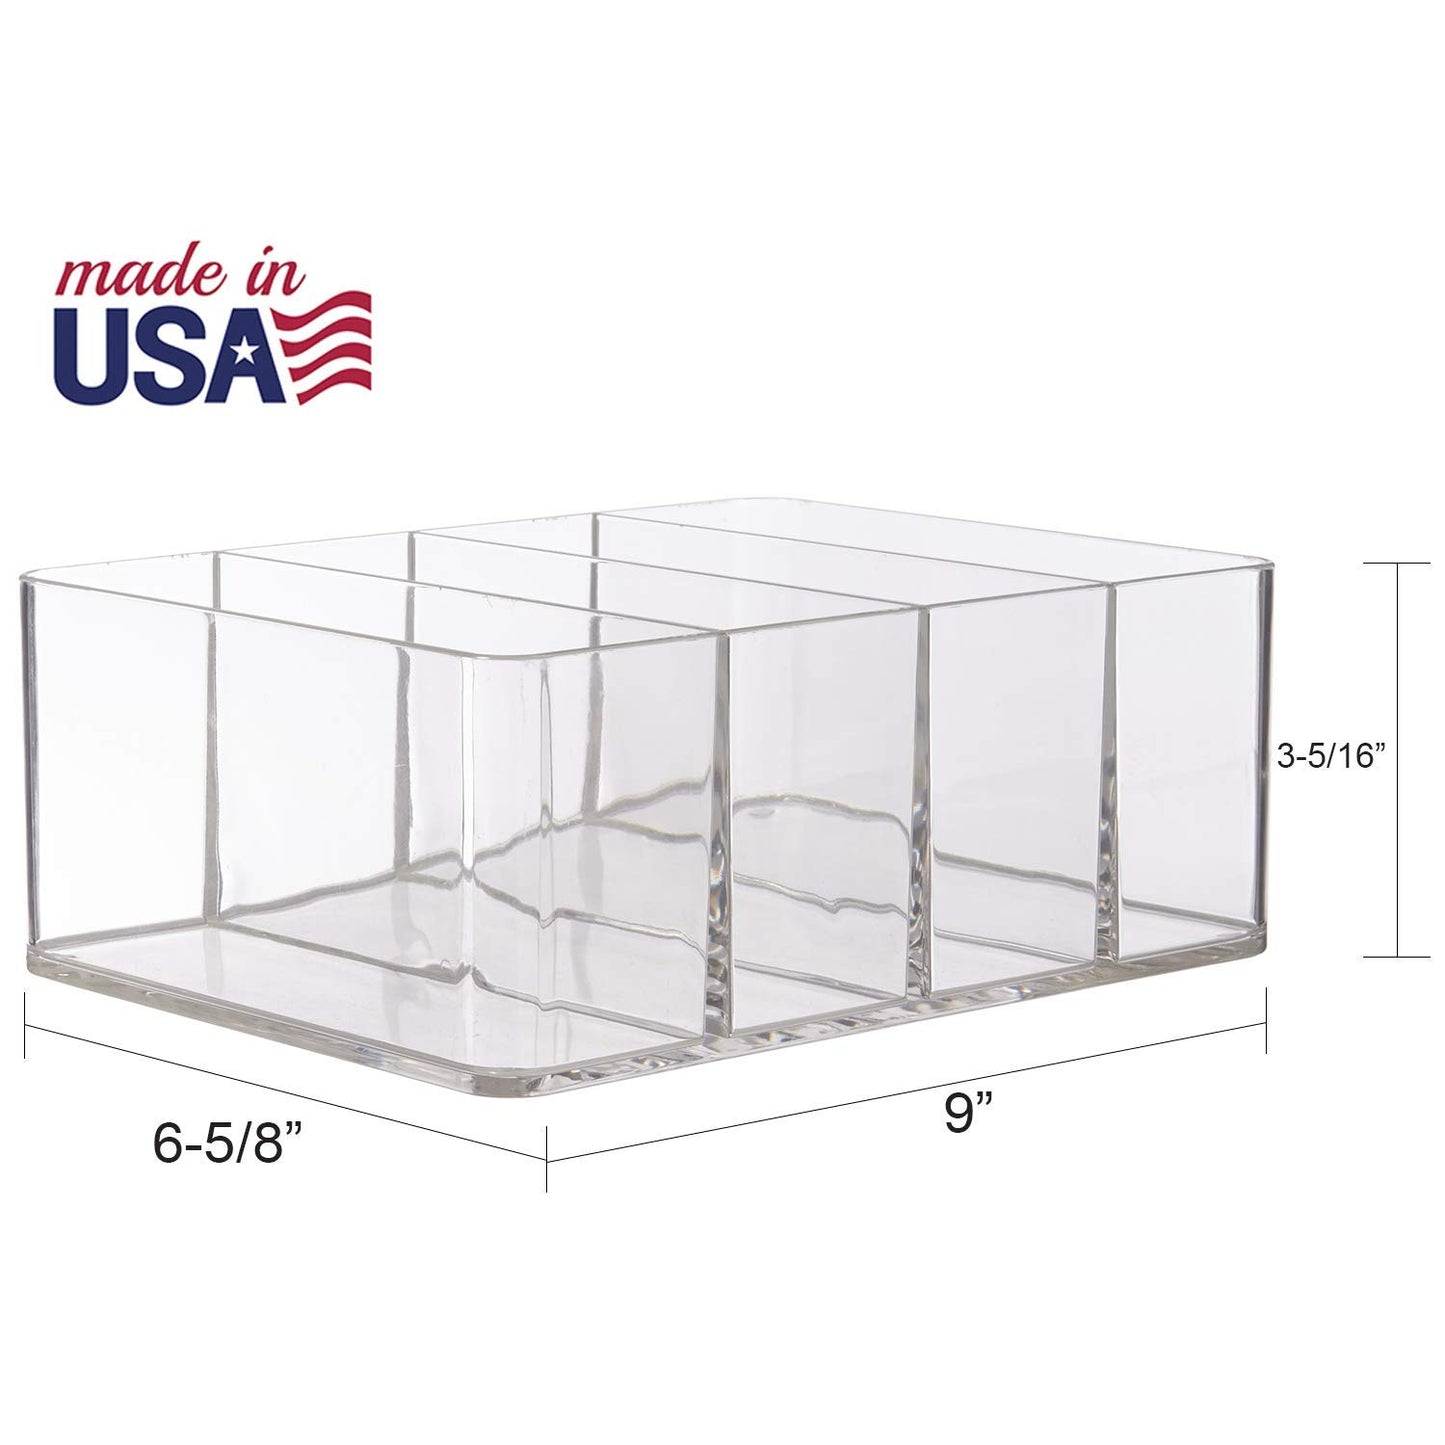 STORi 4-Compartment Clear Plastic Organizer | Rectangular Divided Makeup and Vanity Storage Bin | Use Upright for Eyeshadow Palettes | Round Corner Design | Made in USA